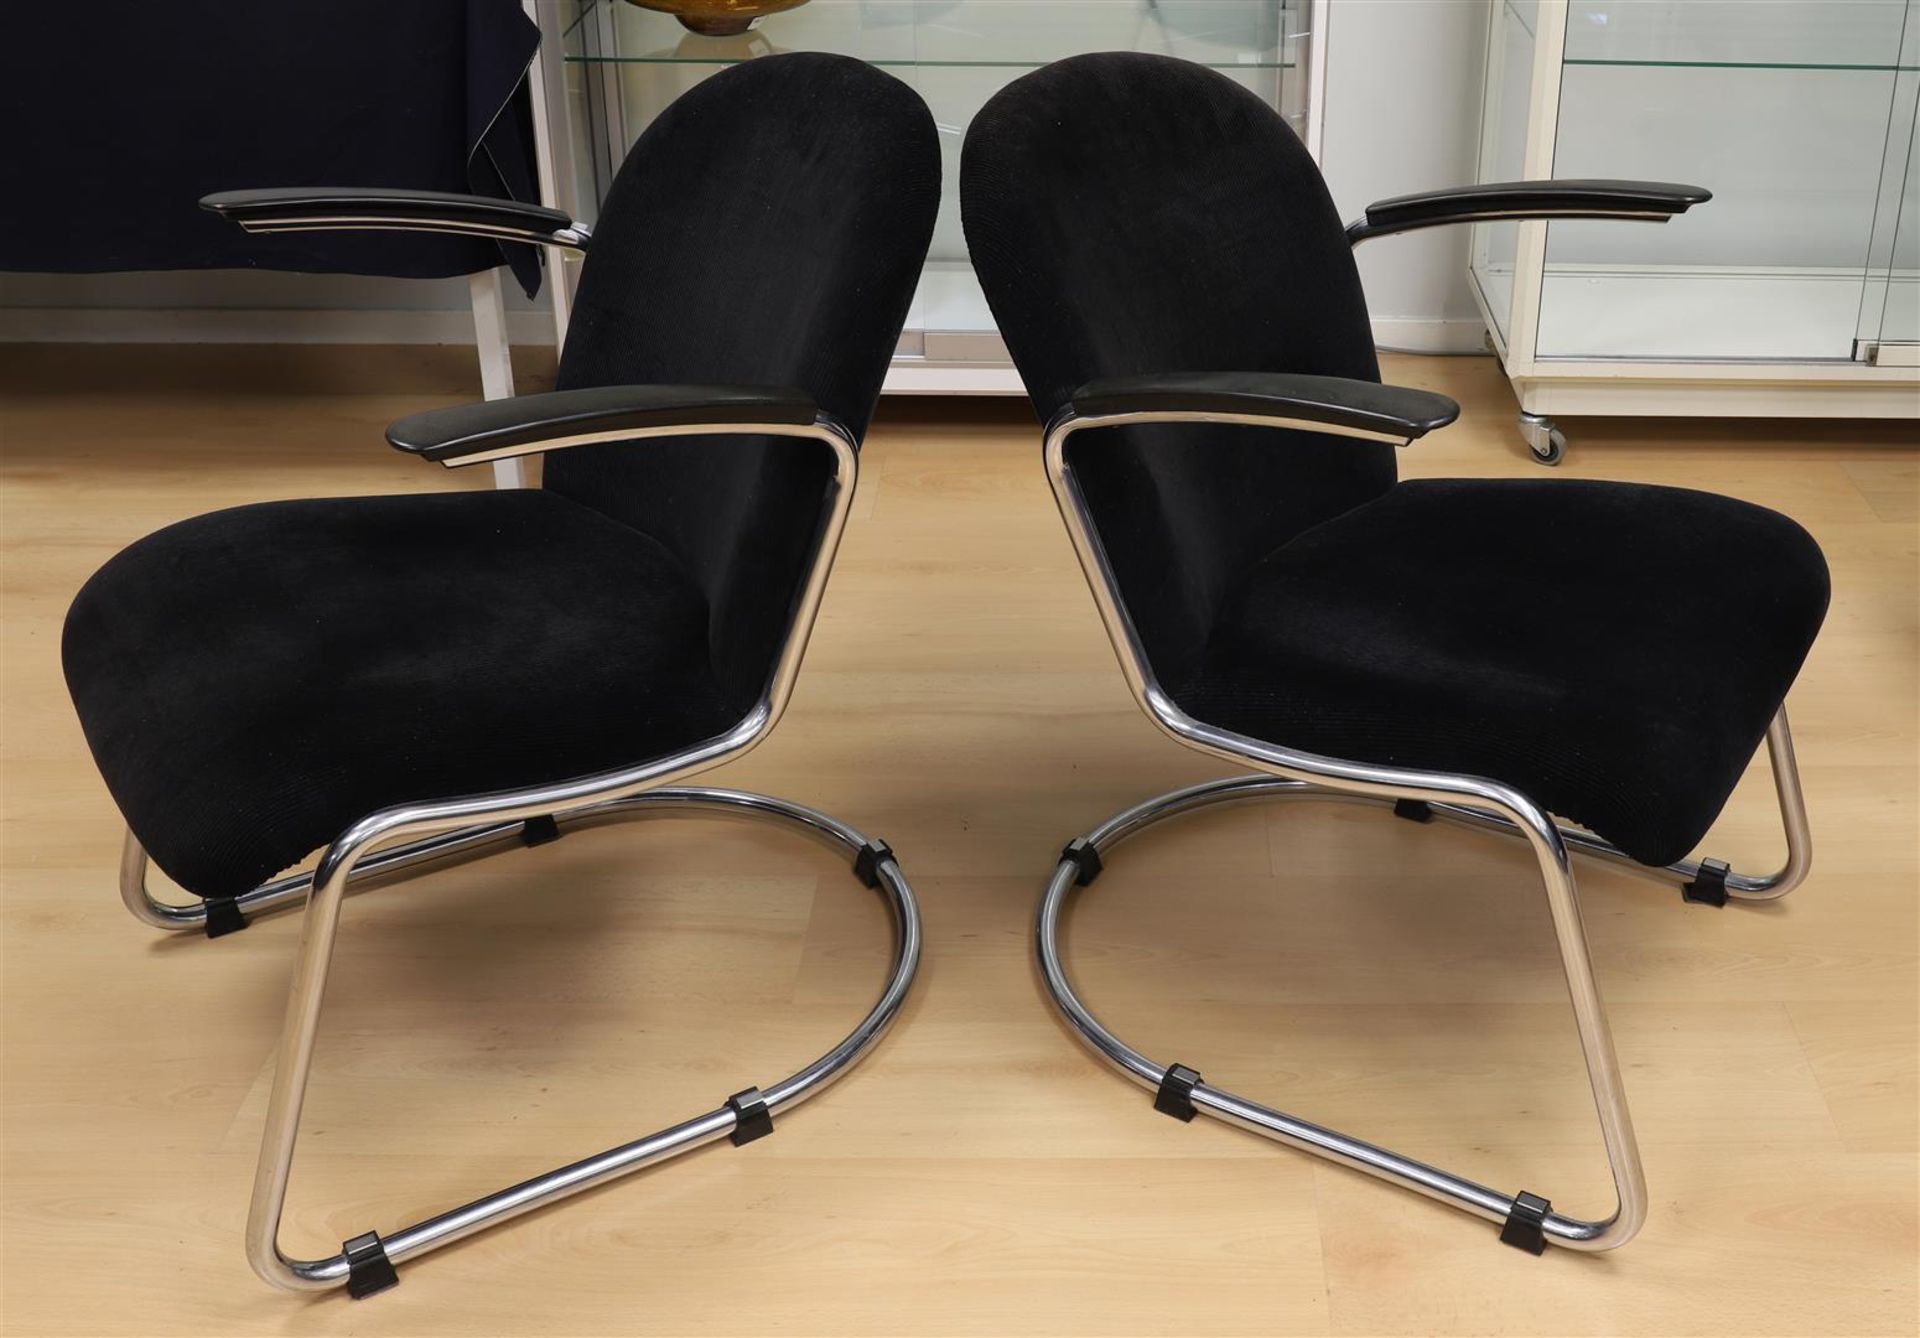 A pair of 413 RH cantilever tubular chairs, design: W.H. Gispen - Image 2 of 2